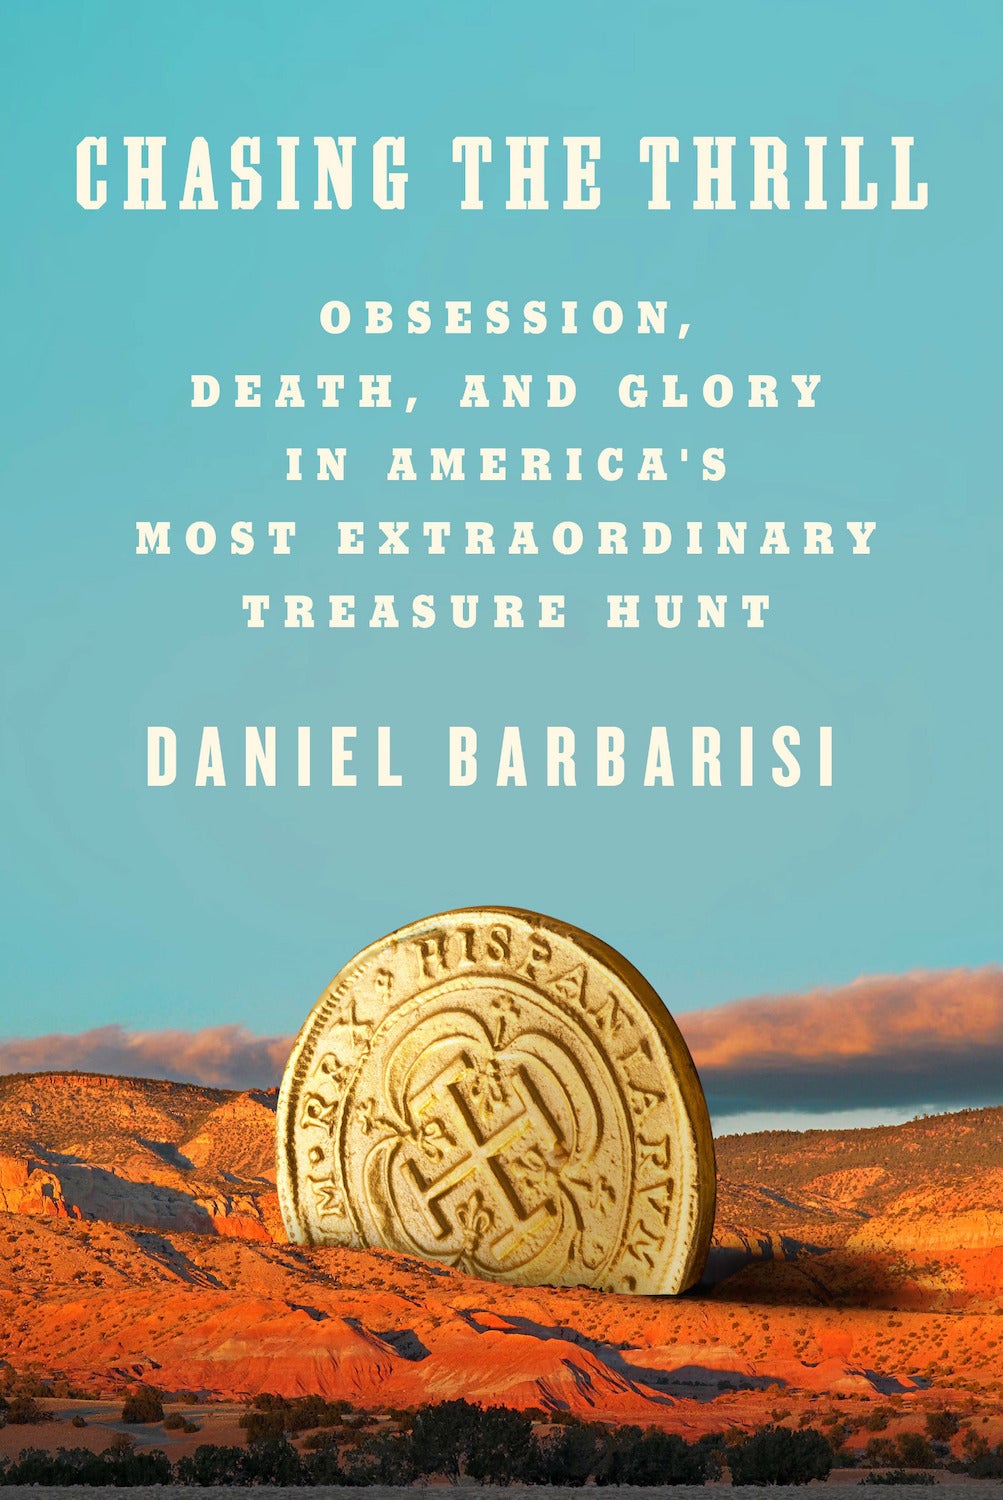 Daniel Barbarisi's new book on the Forrest Fenn treasure hunt will be published in June 2021.